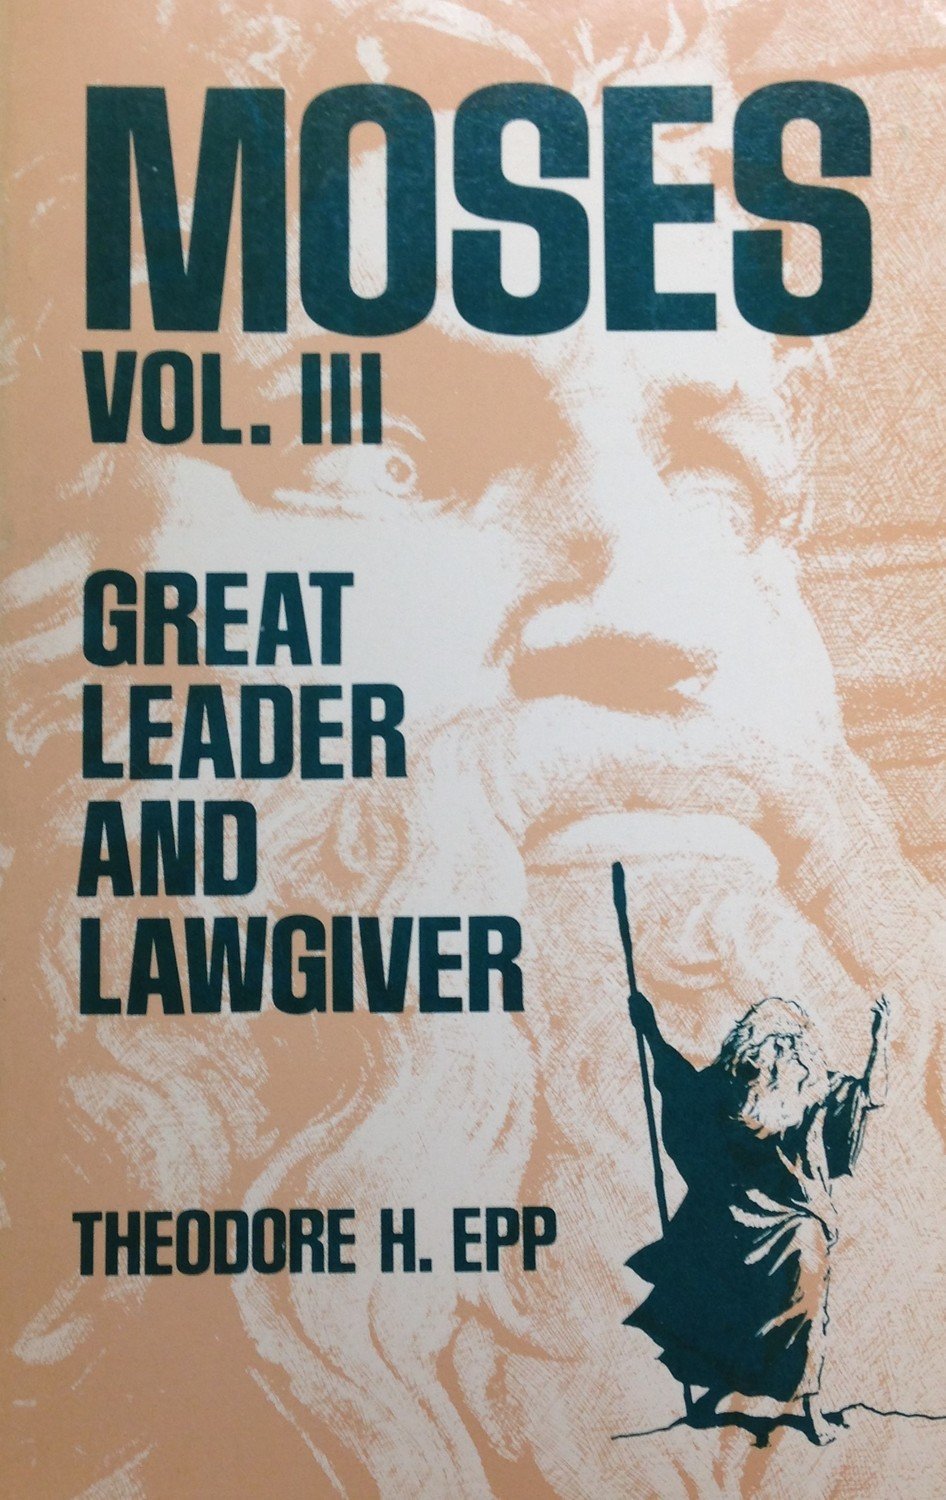 Moses Volume III:  Great Leader and Lawgiver by Theodore H. Epp (USED)